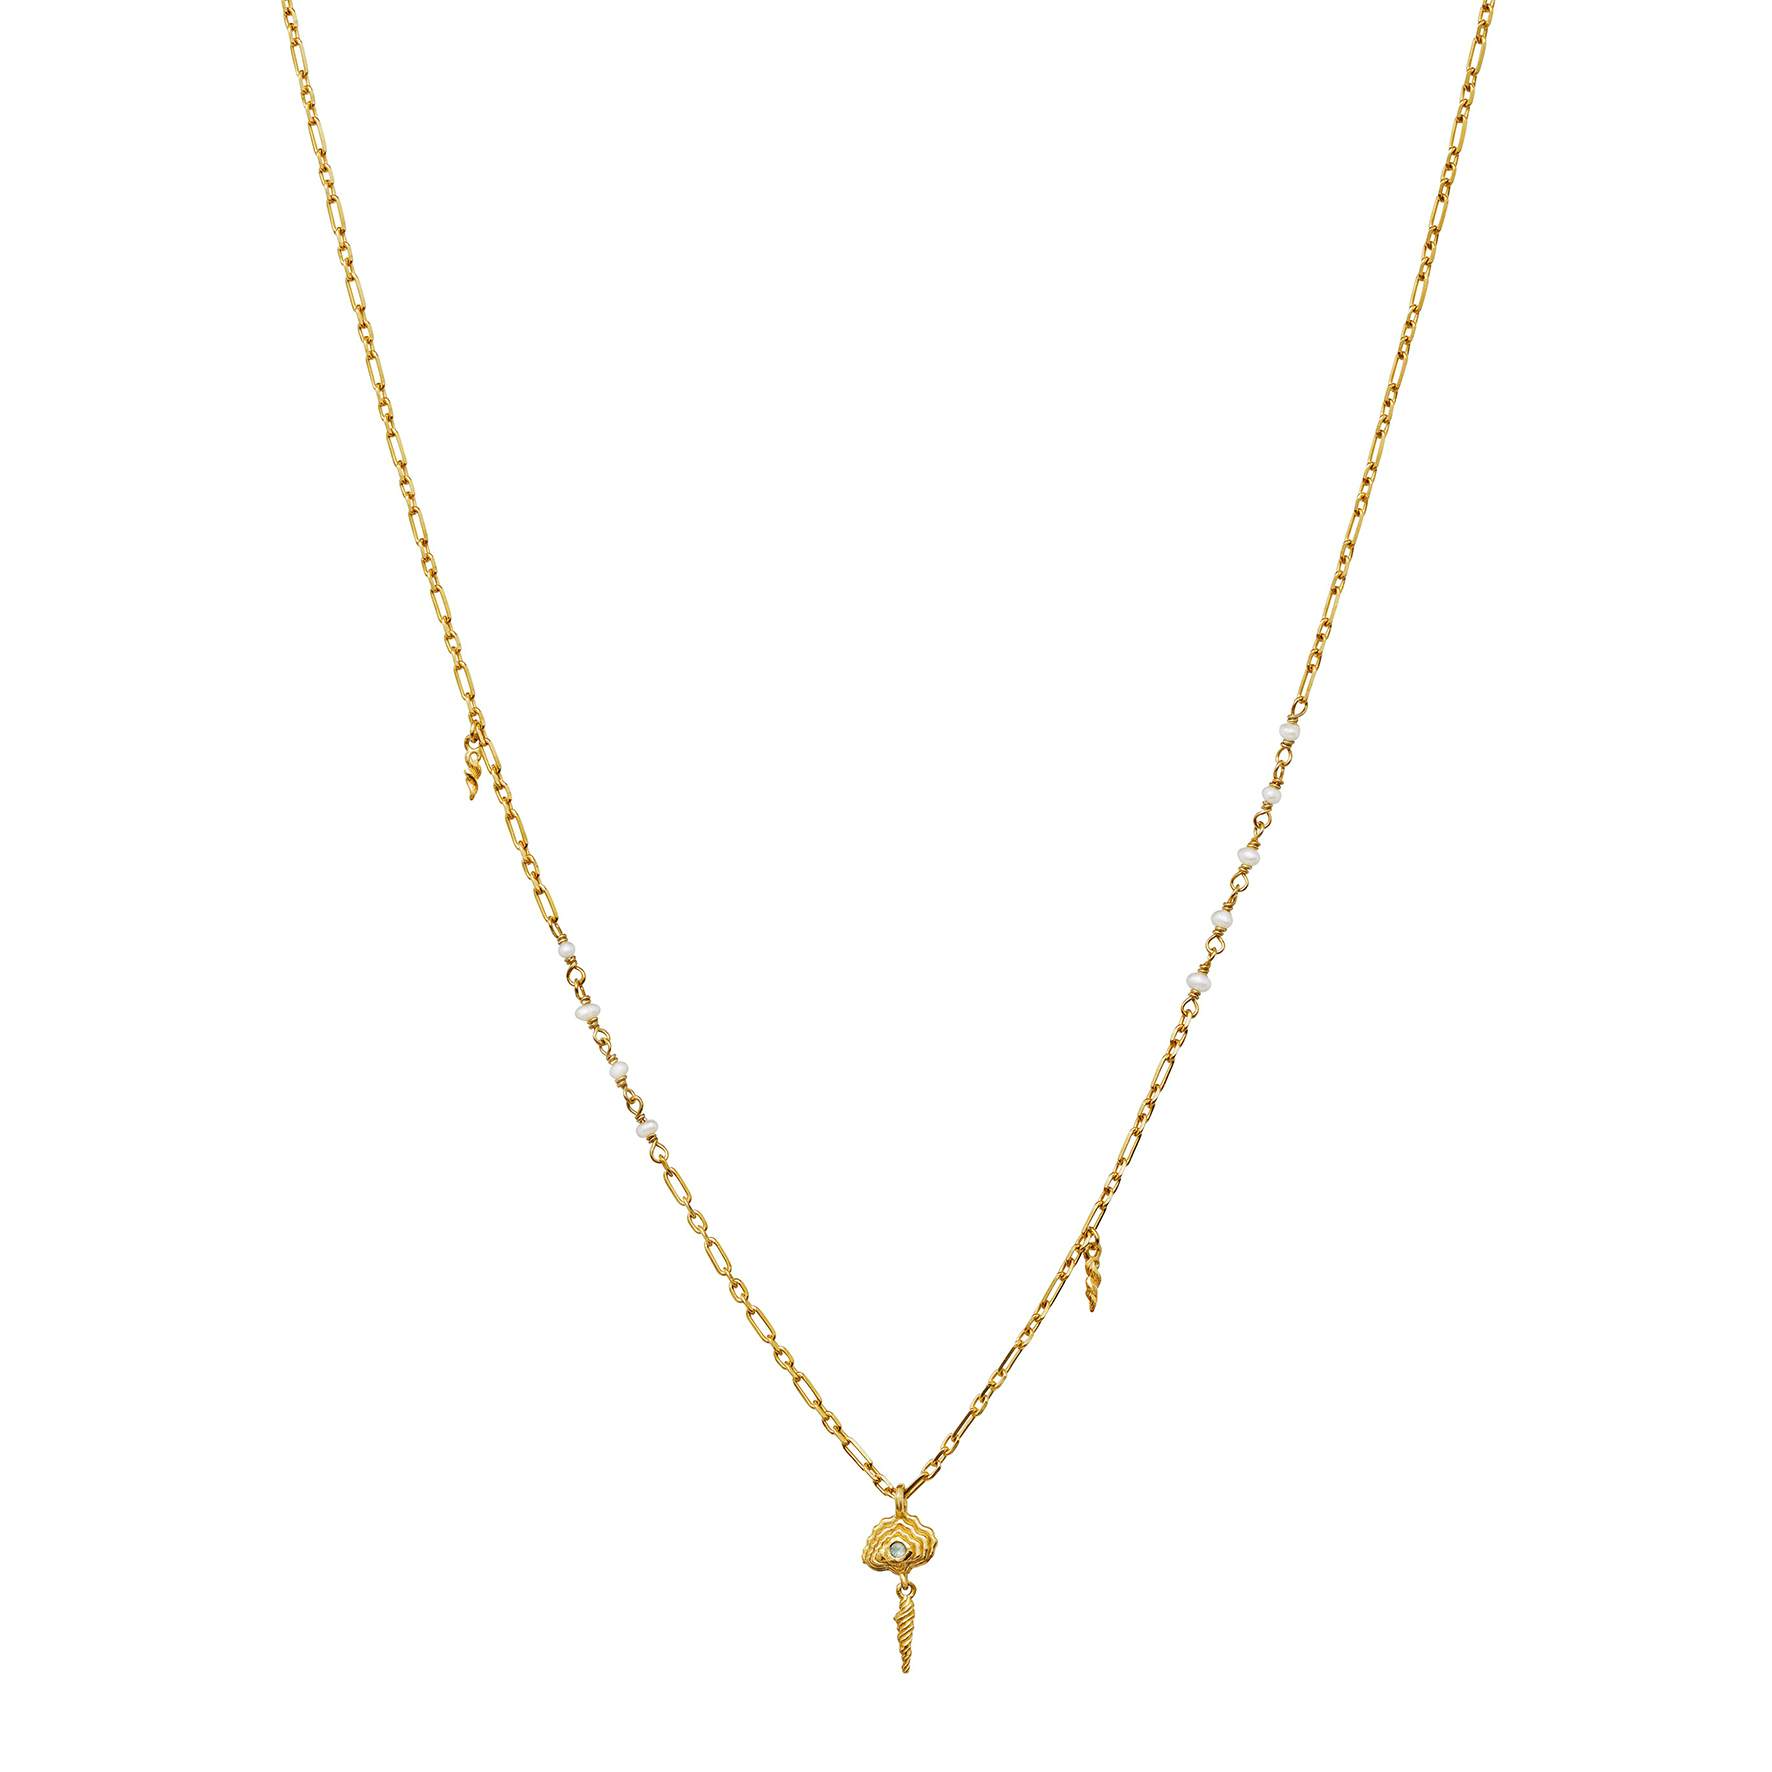 Benedicte Necklace from Maanesten in Goldplated-Silver Sterling 925